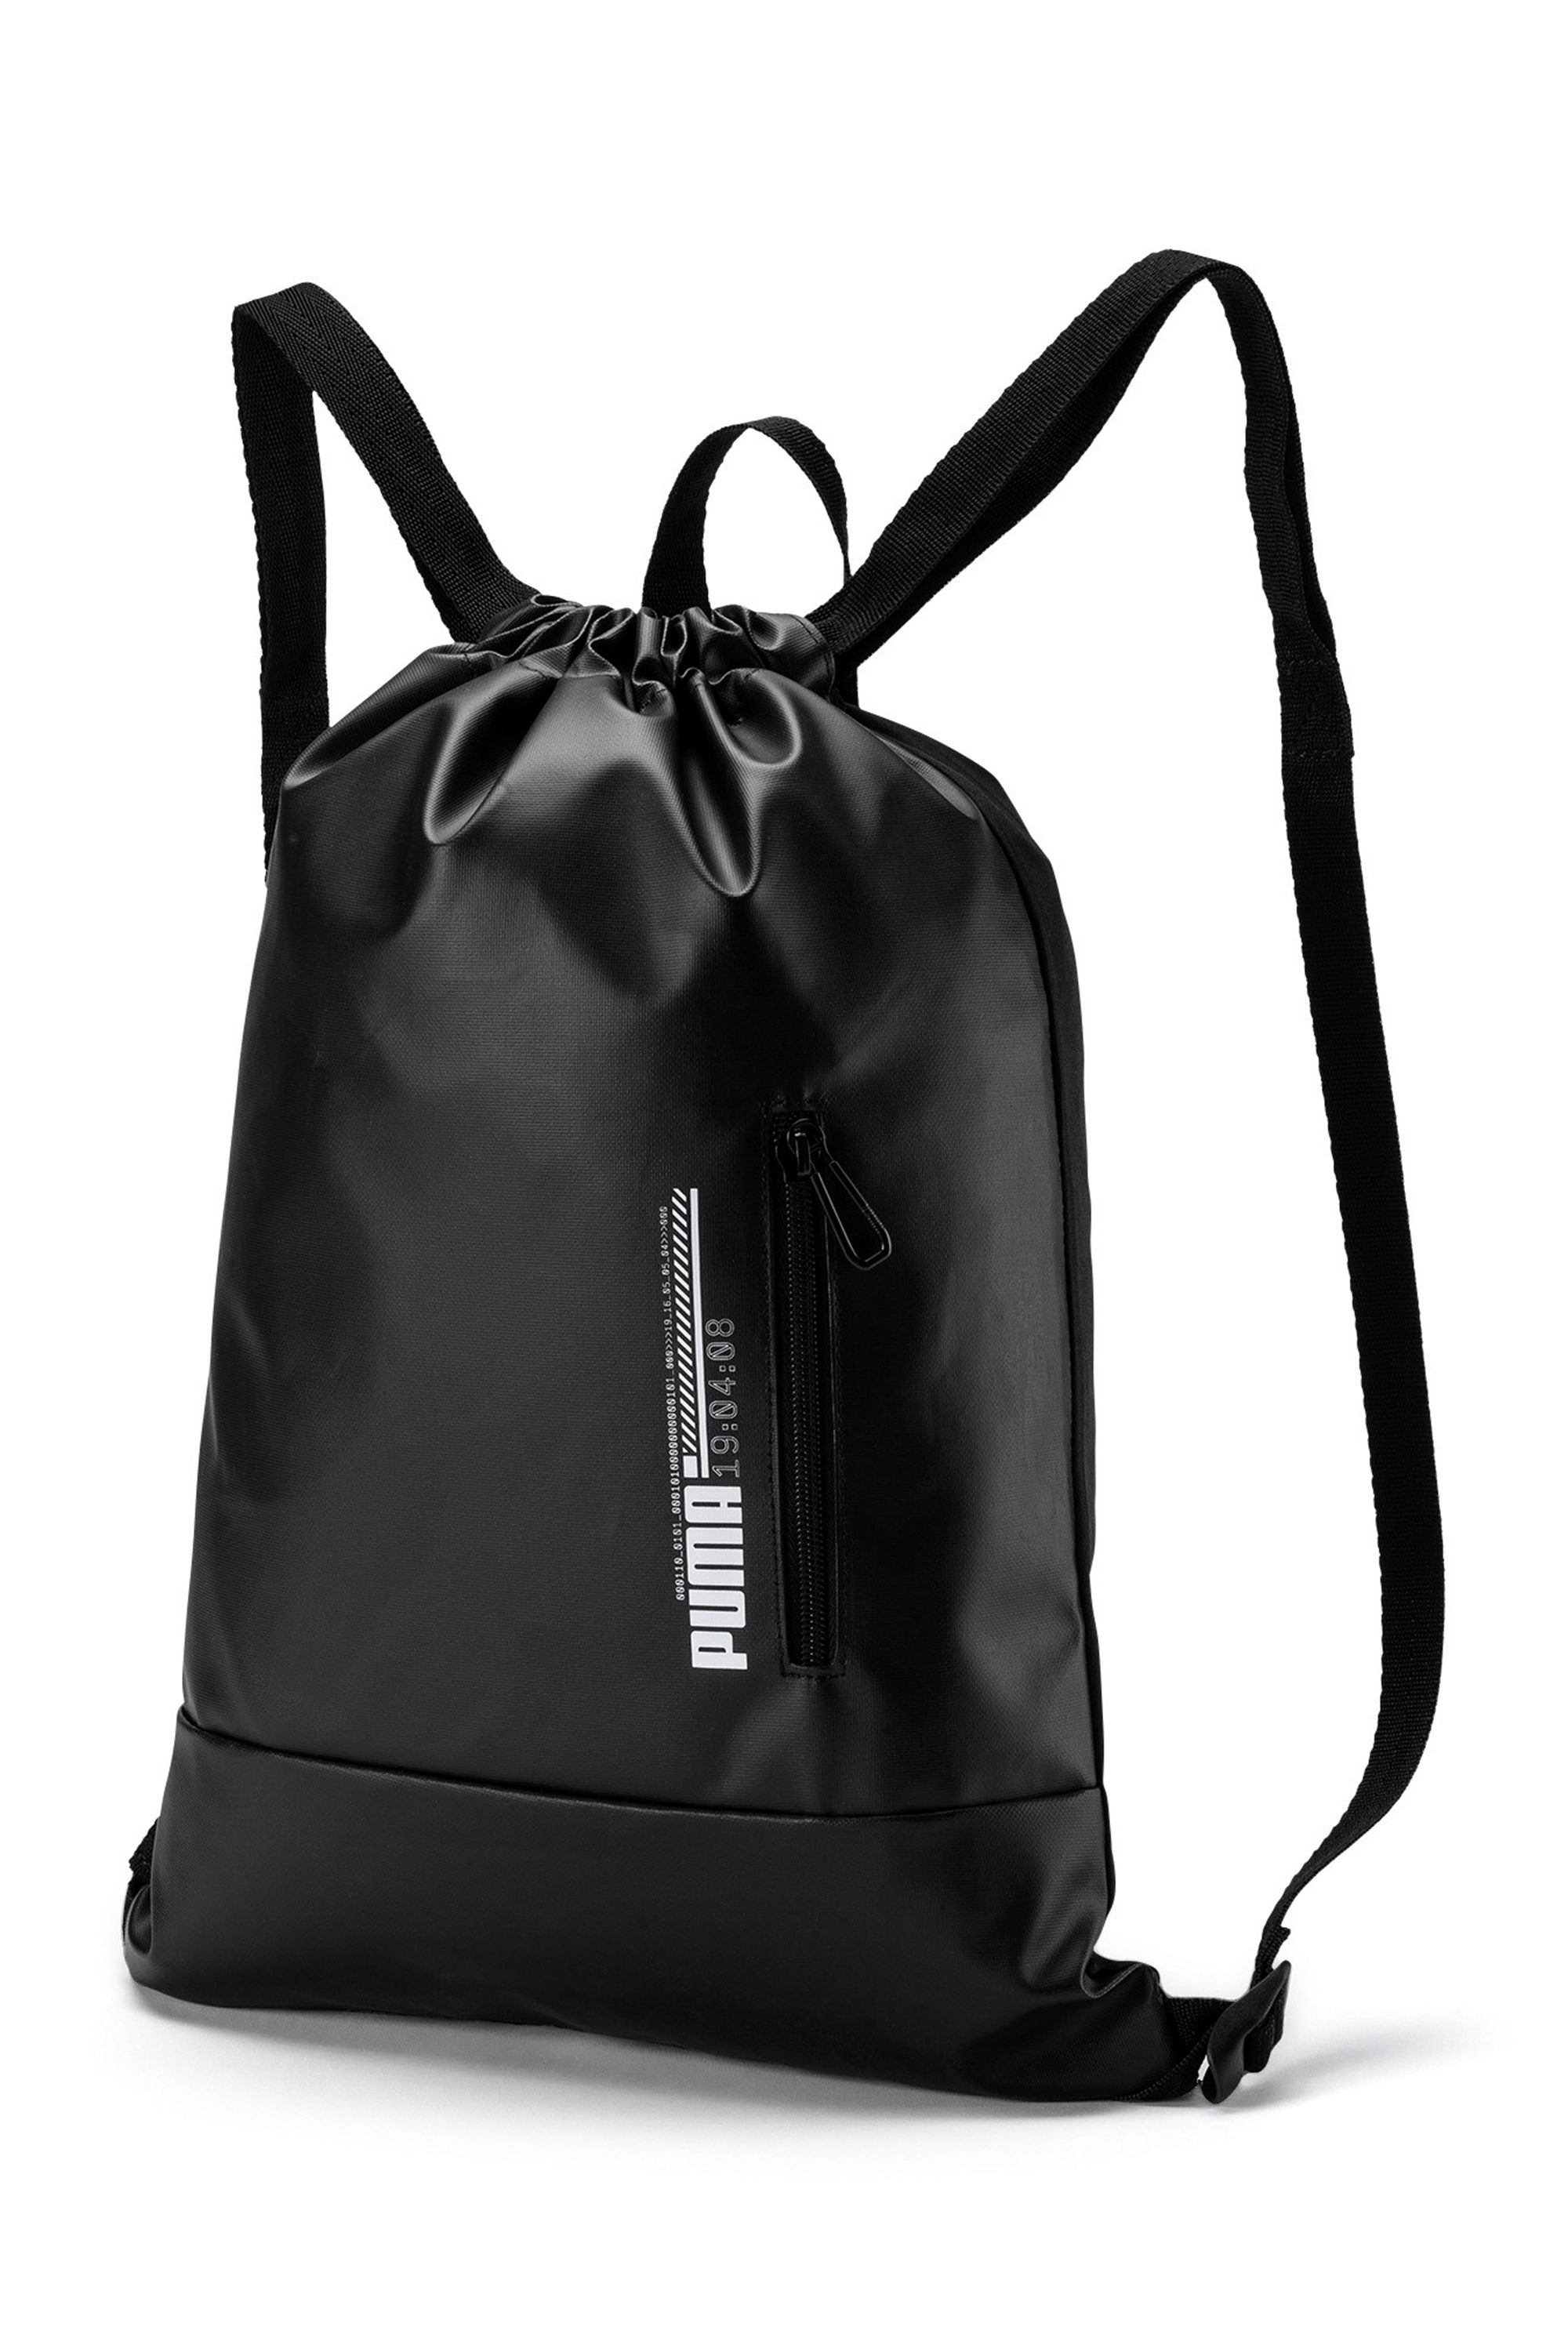 25 Best Gym Bags for Women 2022 - Cute Sports Bags for Your Workout